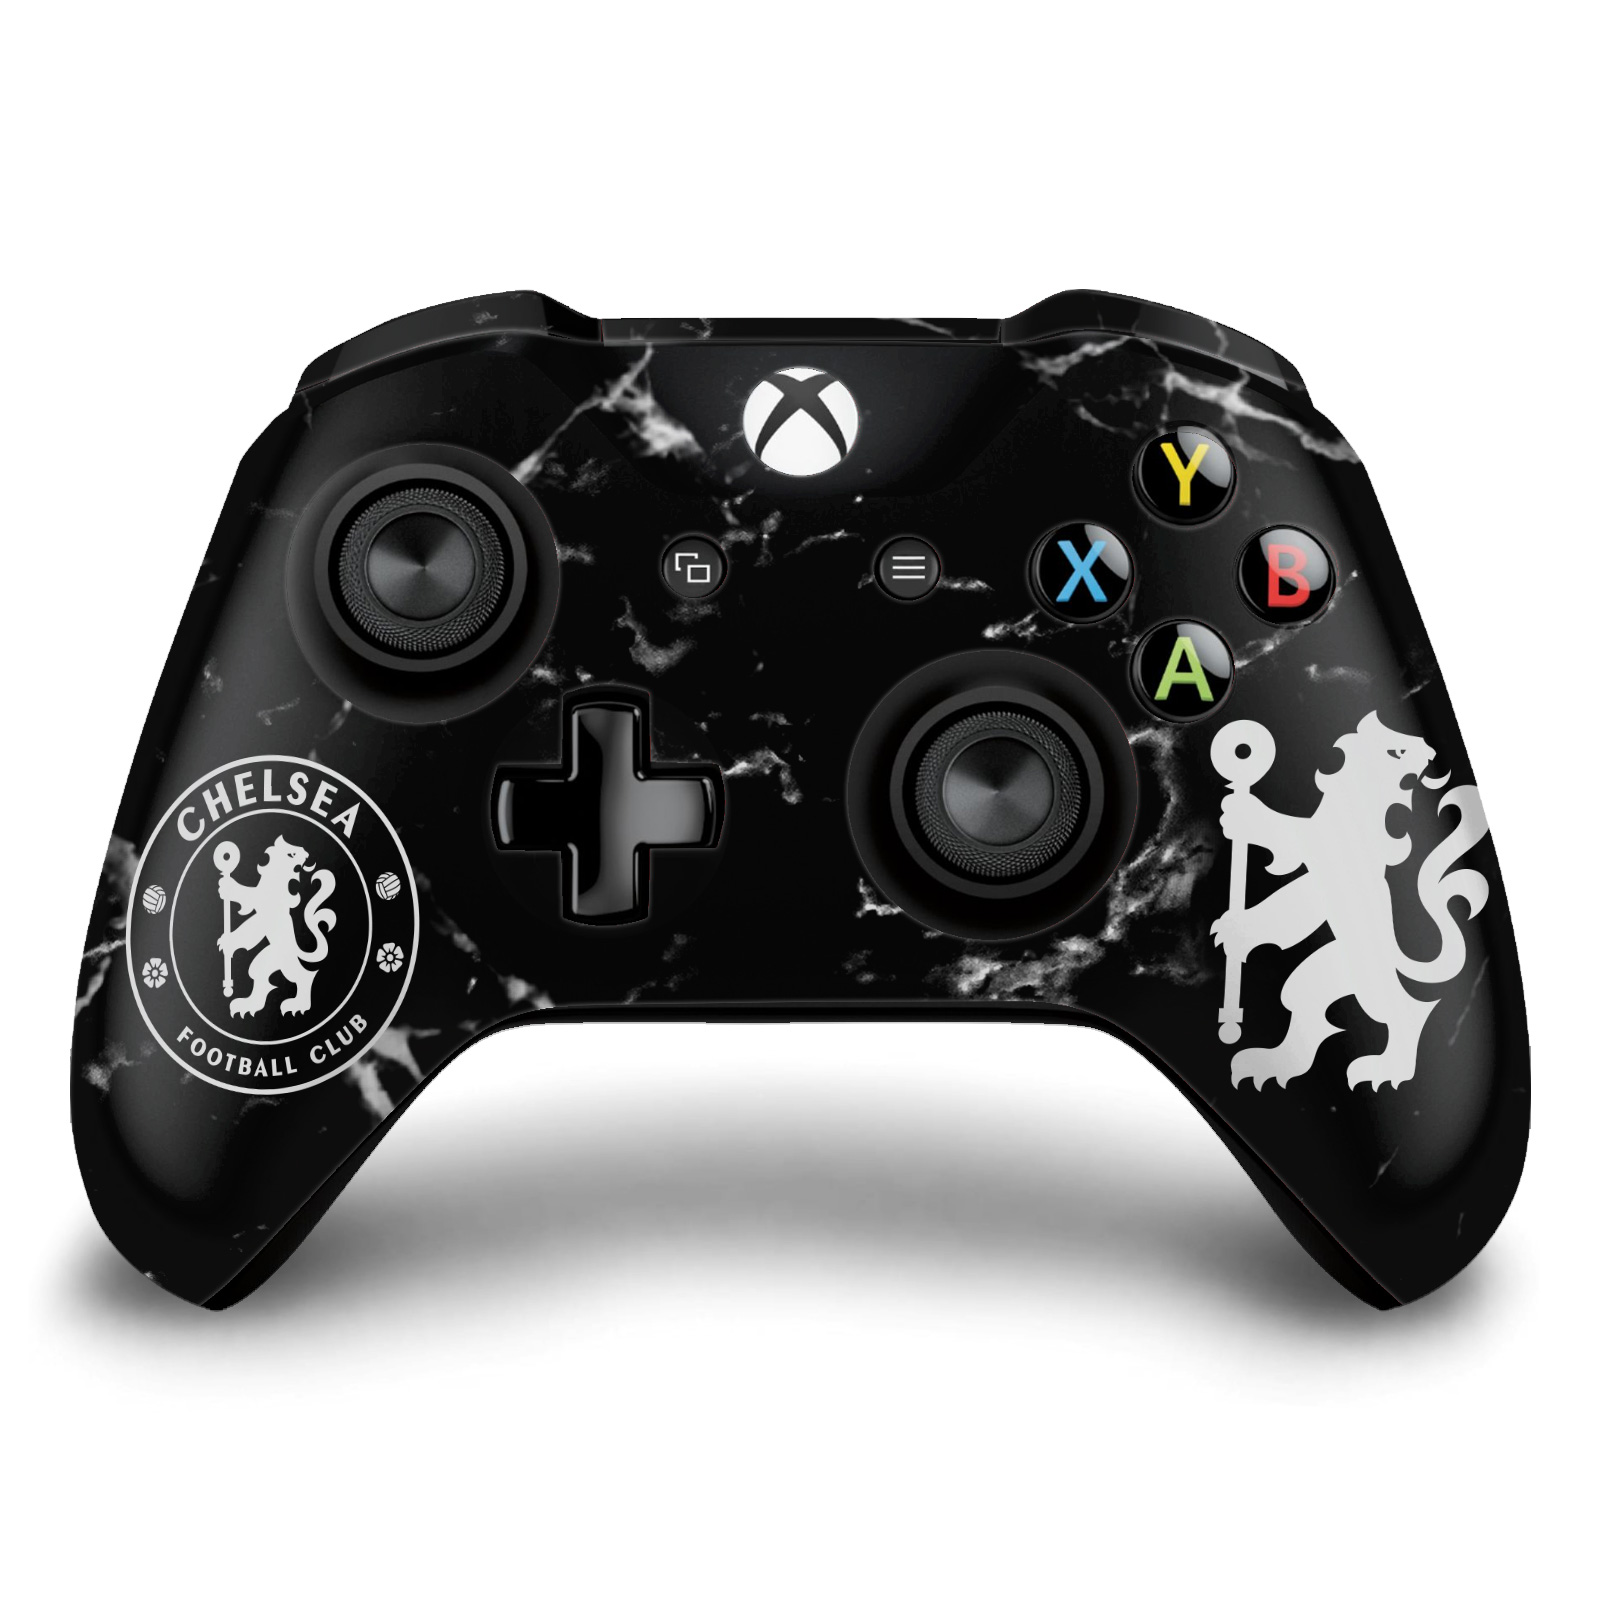 CHELSEA FOOTBALL CLUB Mixed Logo Vinyl Skin Decal For Xbox One S / X ...